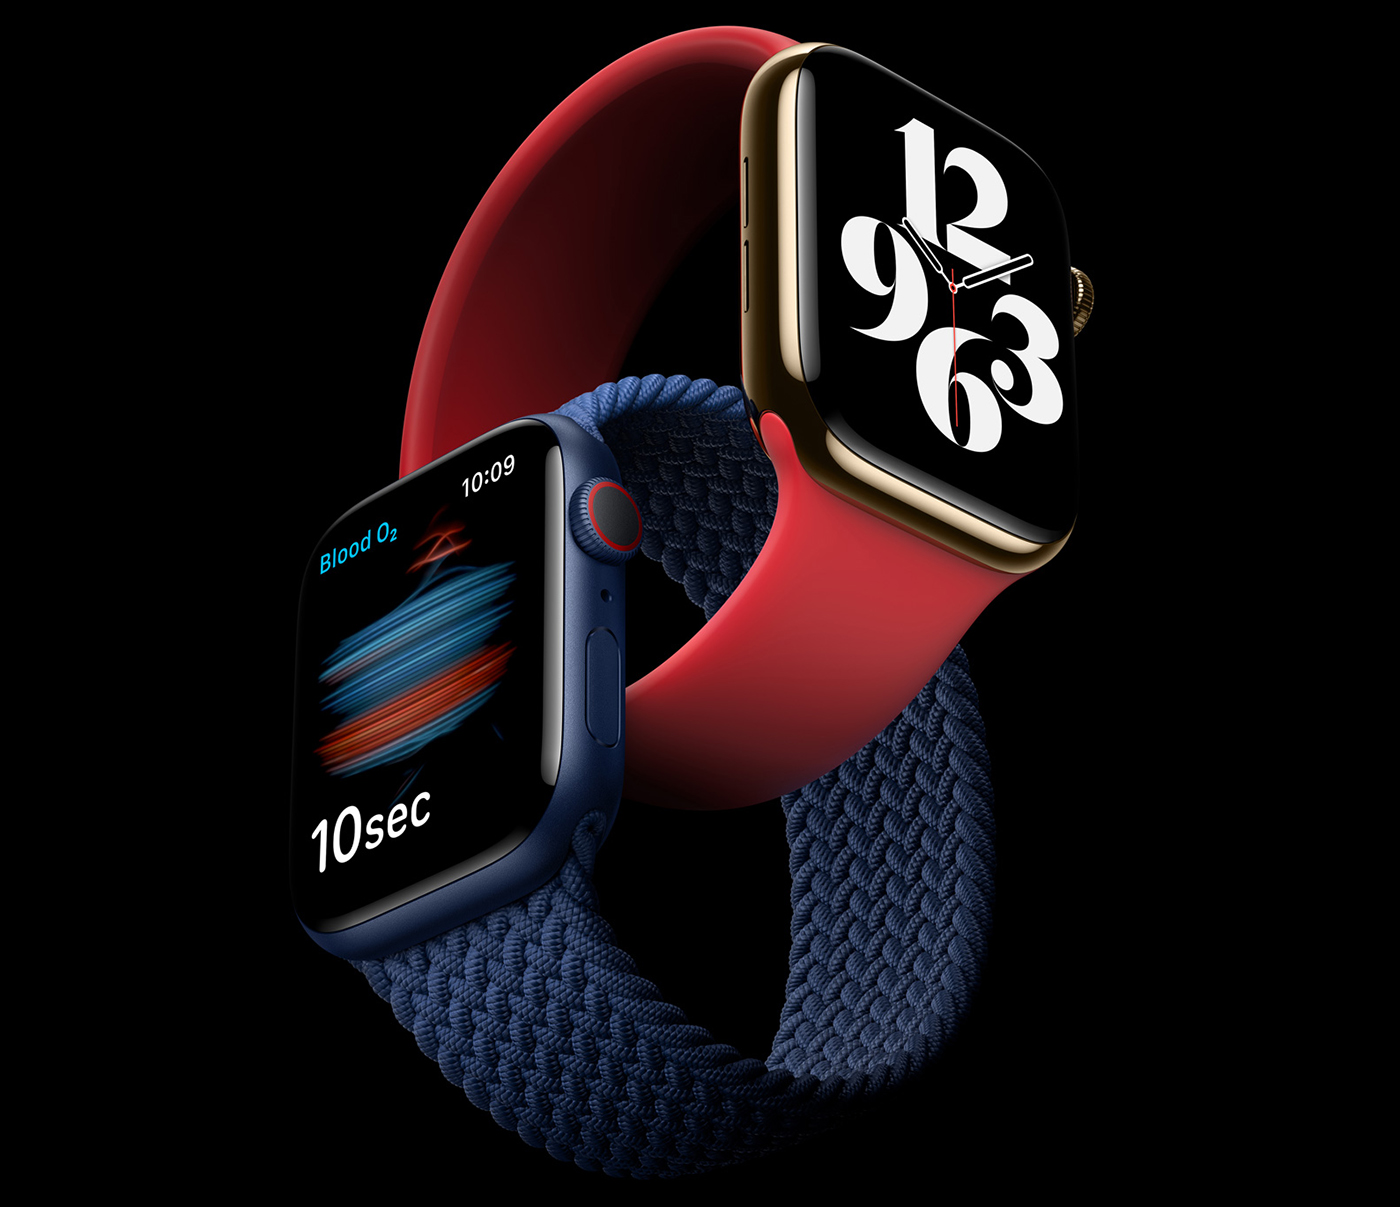 The New Apple Watch Series 6 Gets Colorful Updates, Now Measures Blood Oxygen Levels